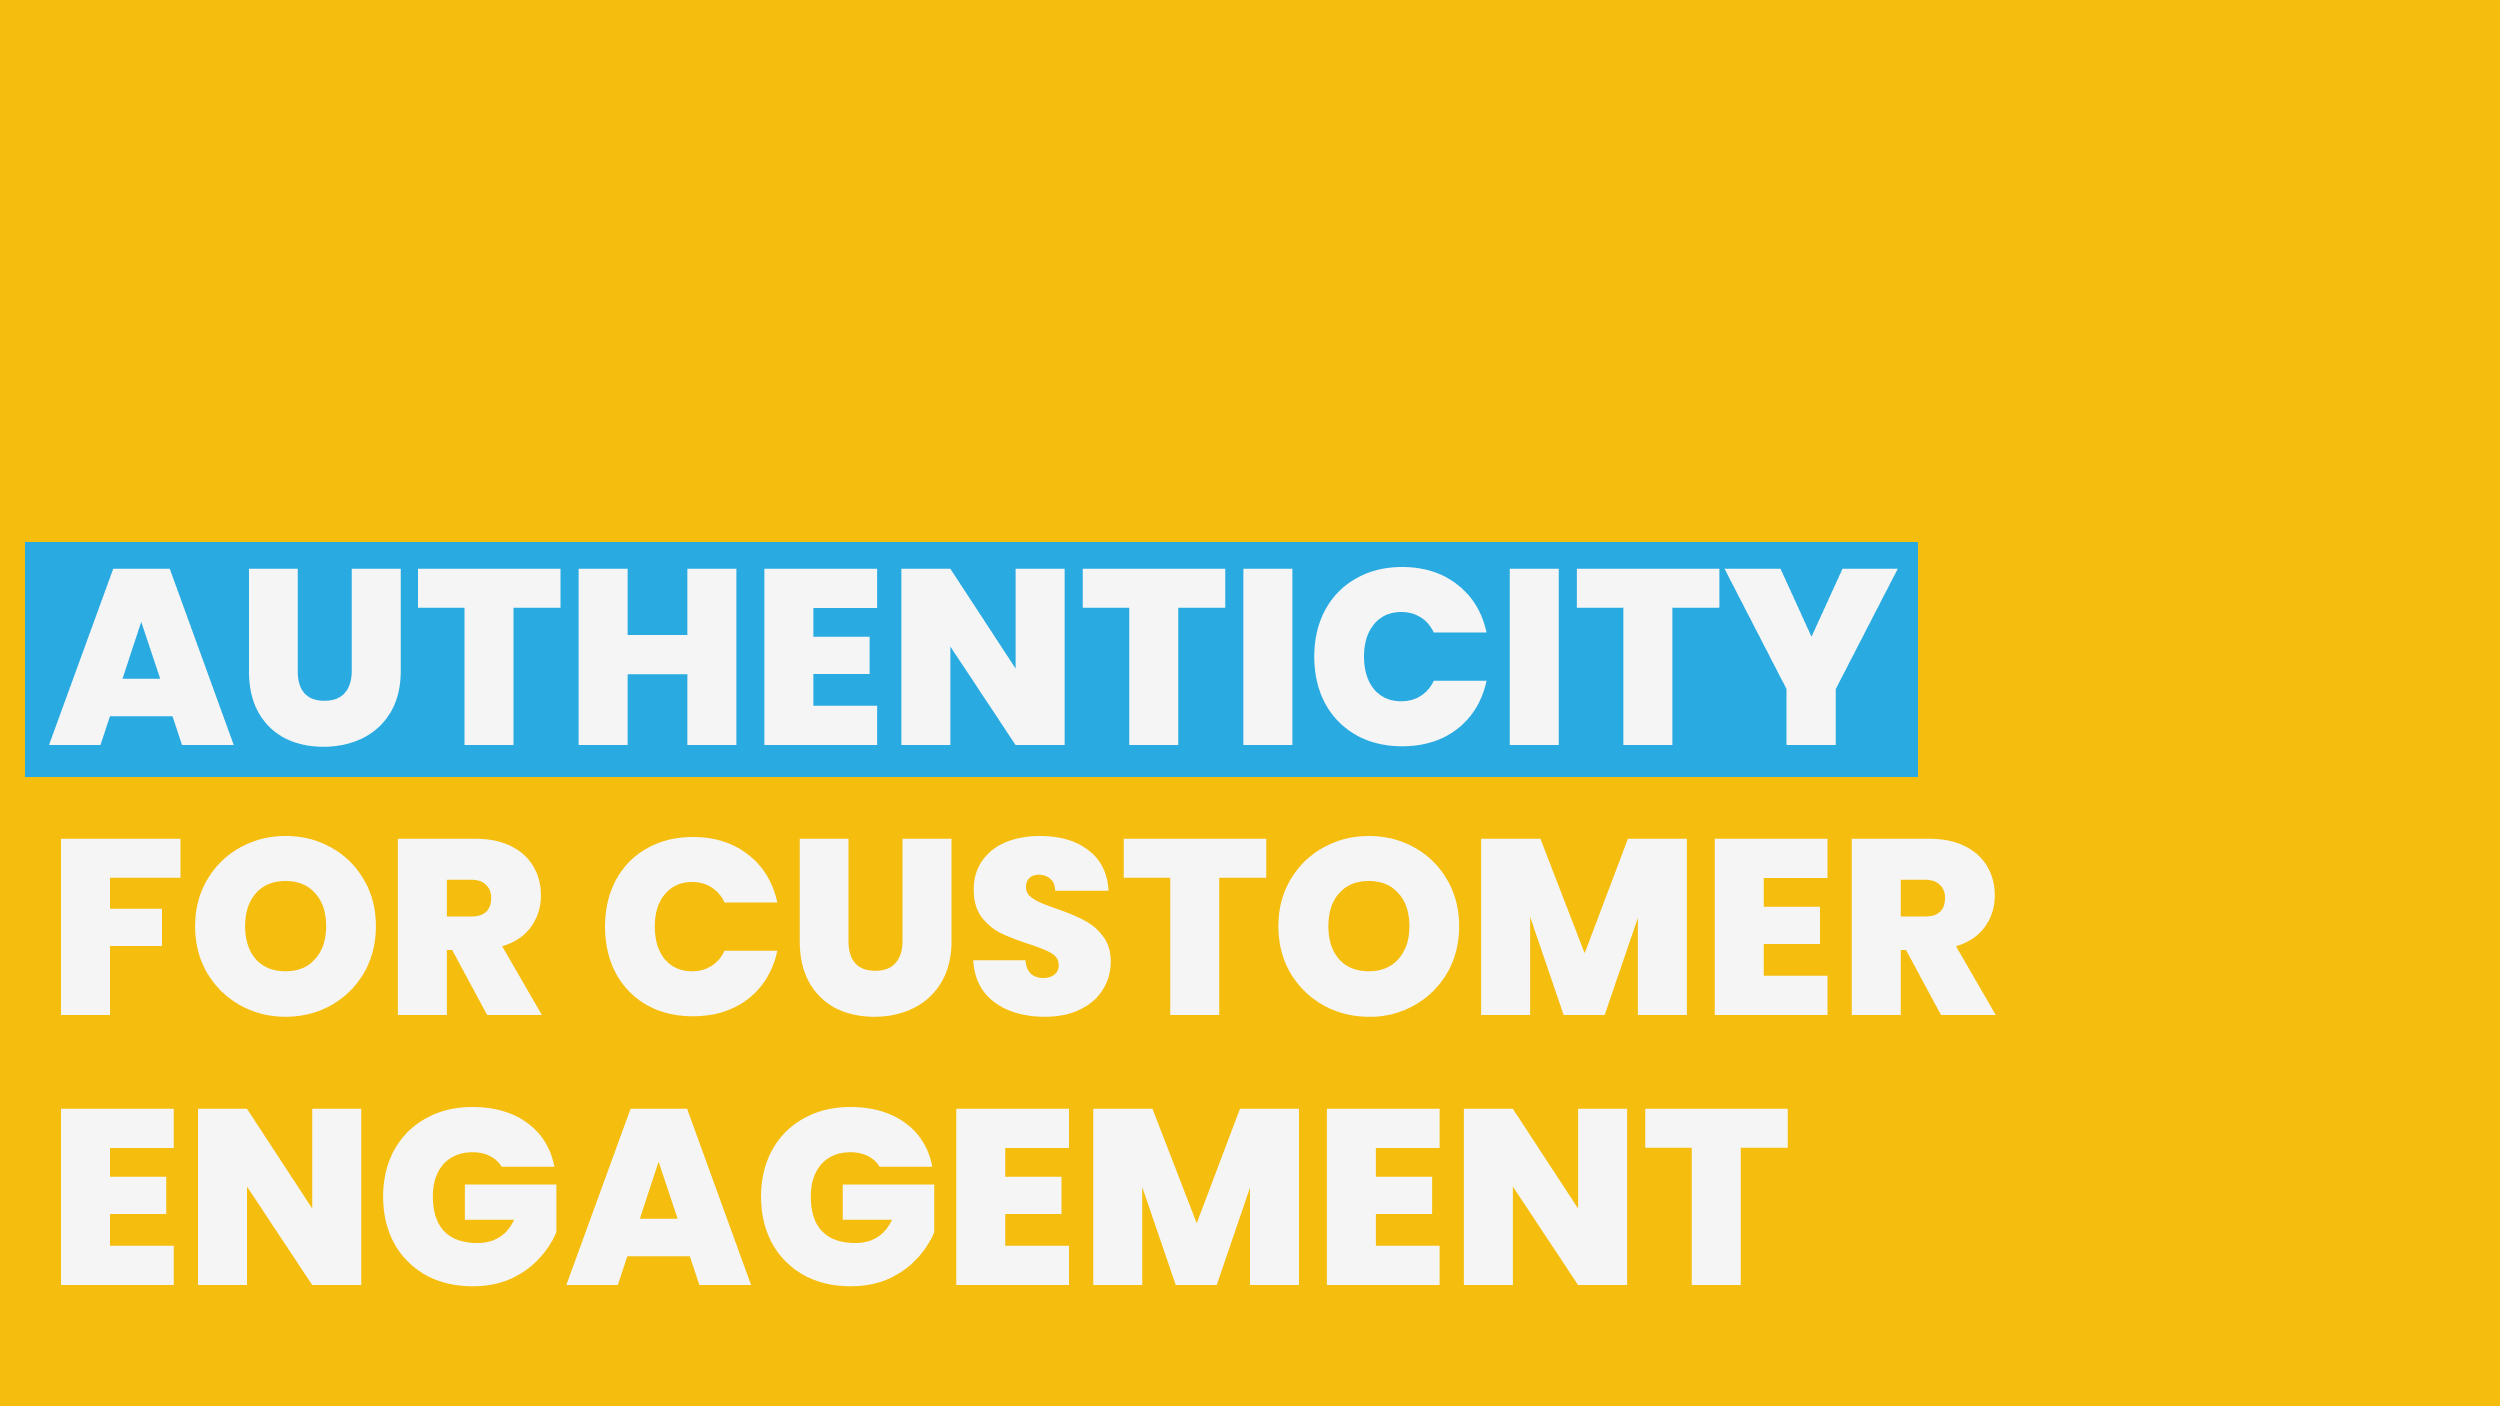 AUTHENTICITY FOR CUSTOMER ENGAGEMENT